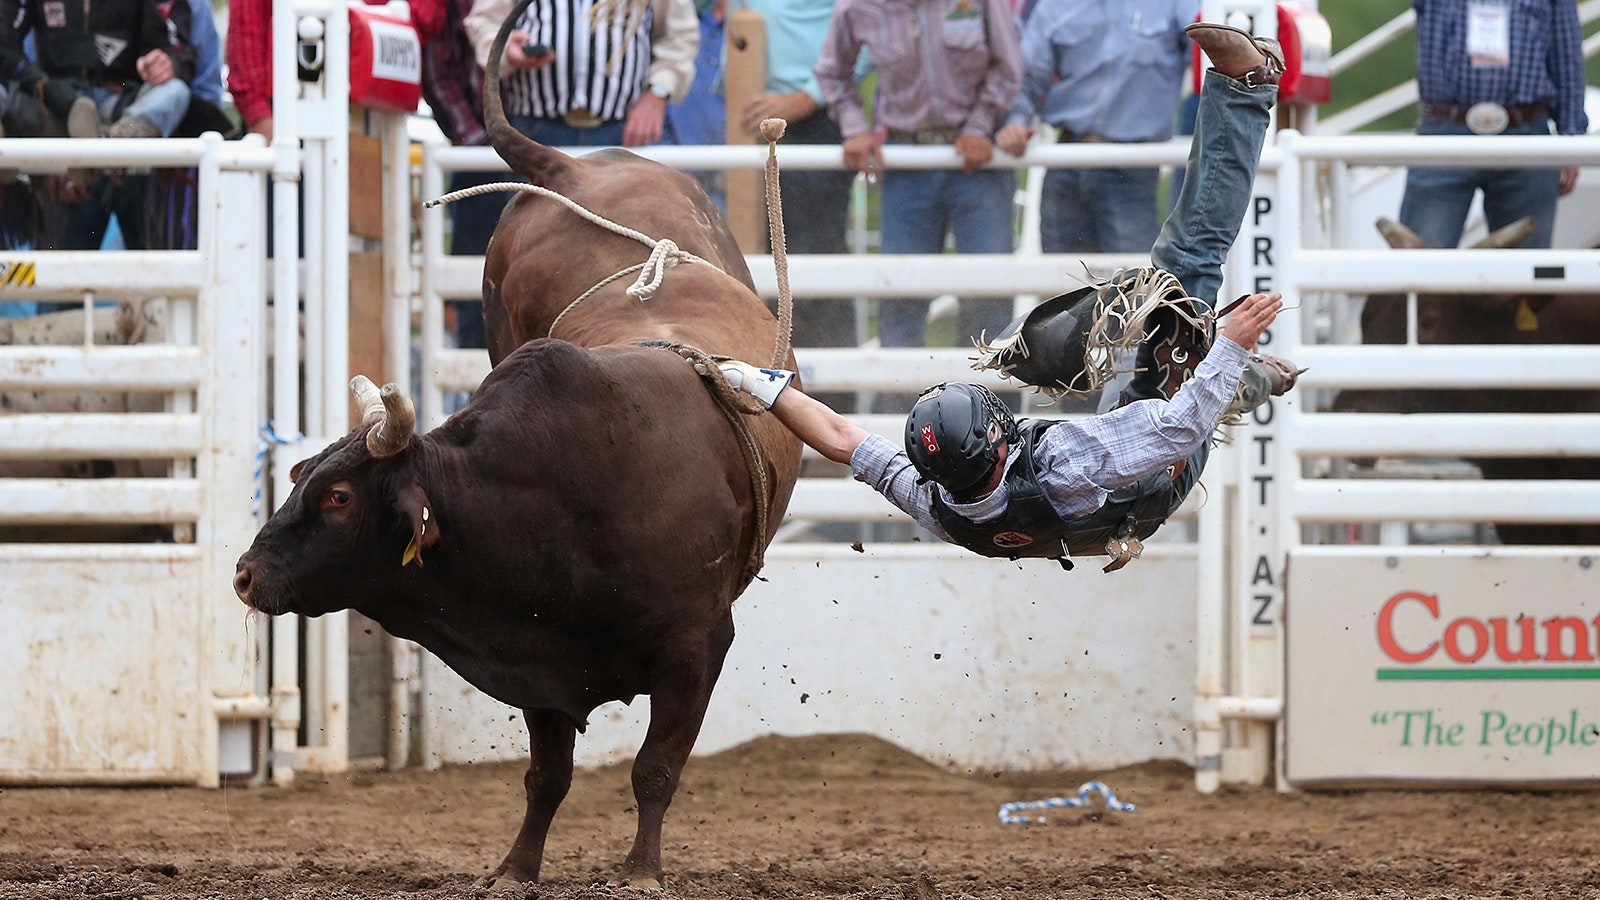 Clayton Savage is thrown from a bull during the Prescott Frontier Days rodeo in Arizona in 2014.